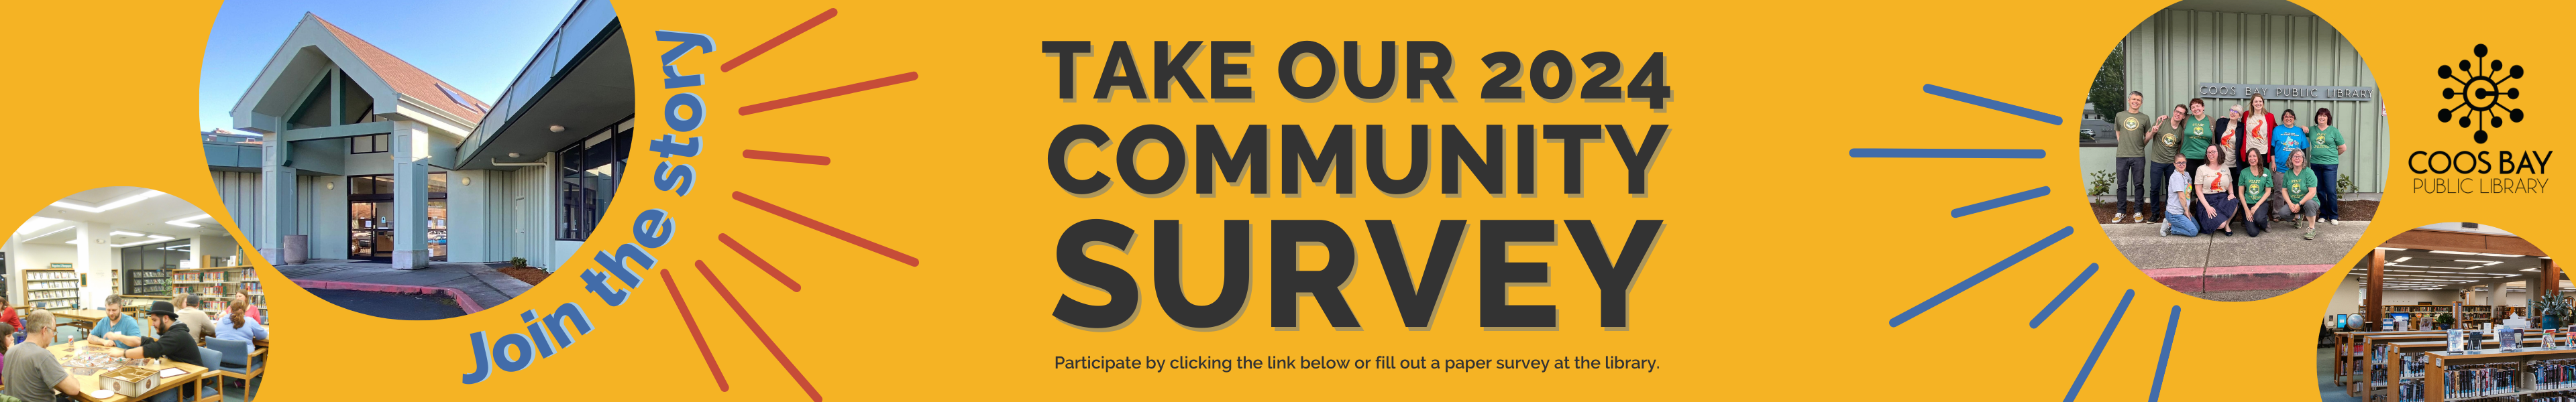 Take our 2024 Community Survey. Participate by clicking the link below or fill out a paper survey at the library.